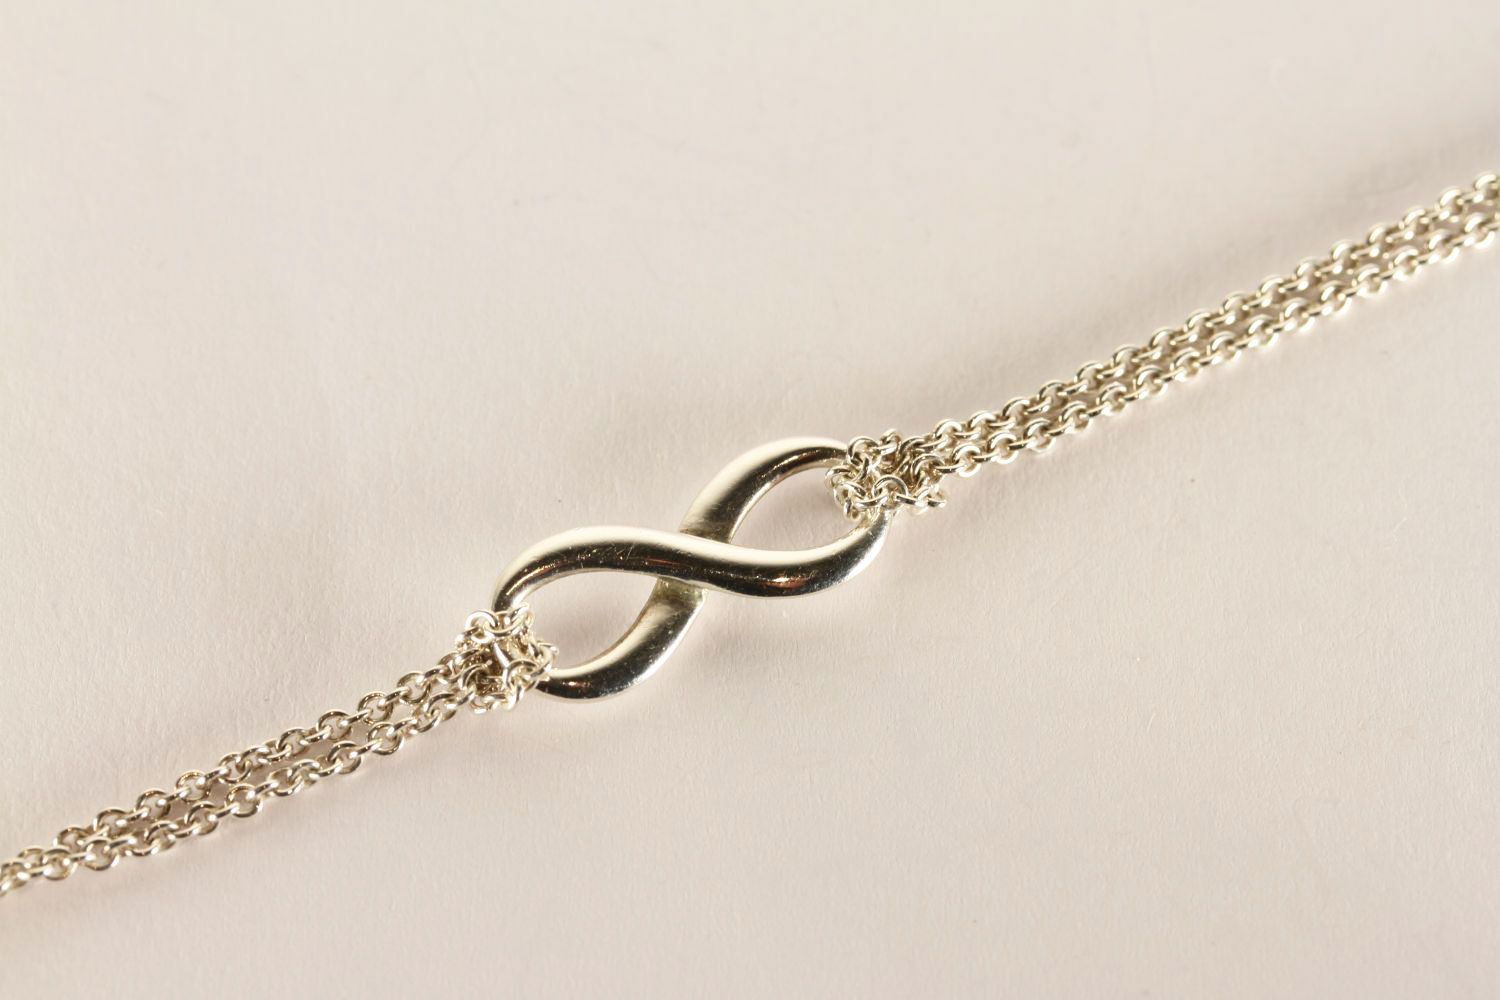 Tiffany & Co Infinity Bracelet, stamped sterling silver, approximate length 14.5cm, comes with a